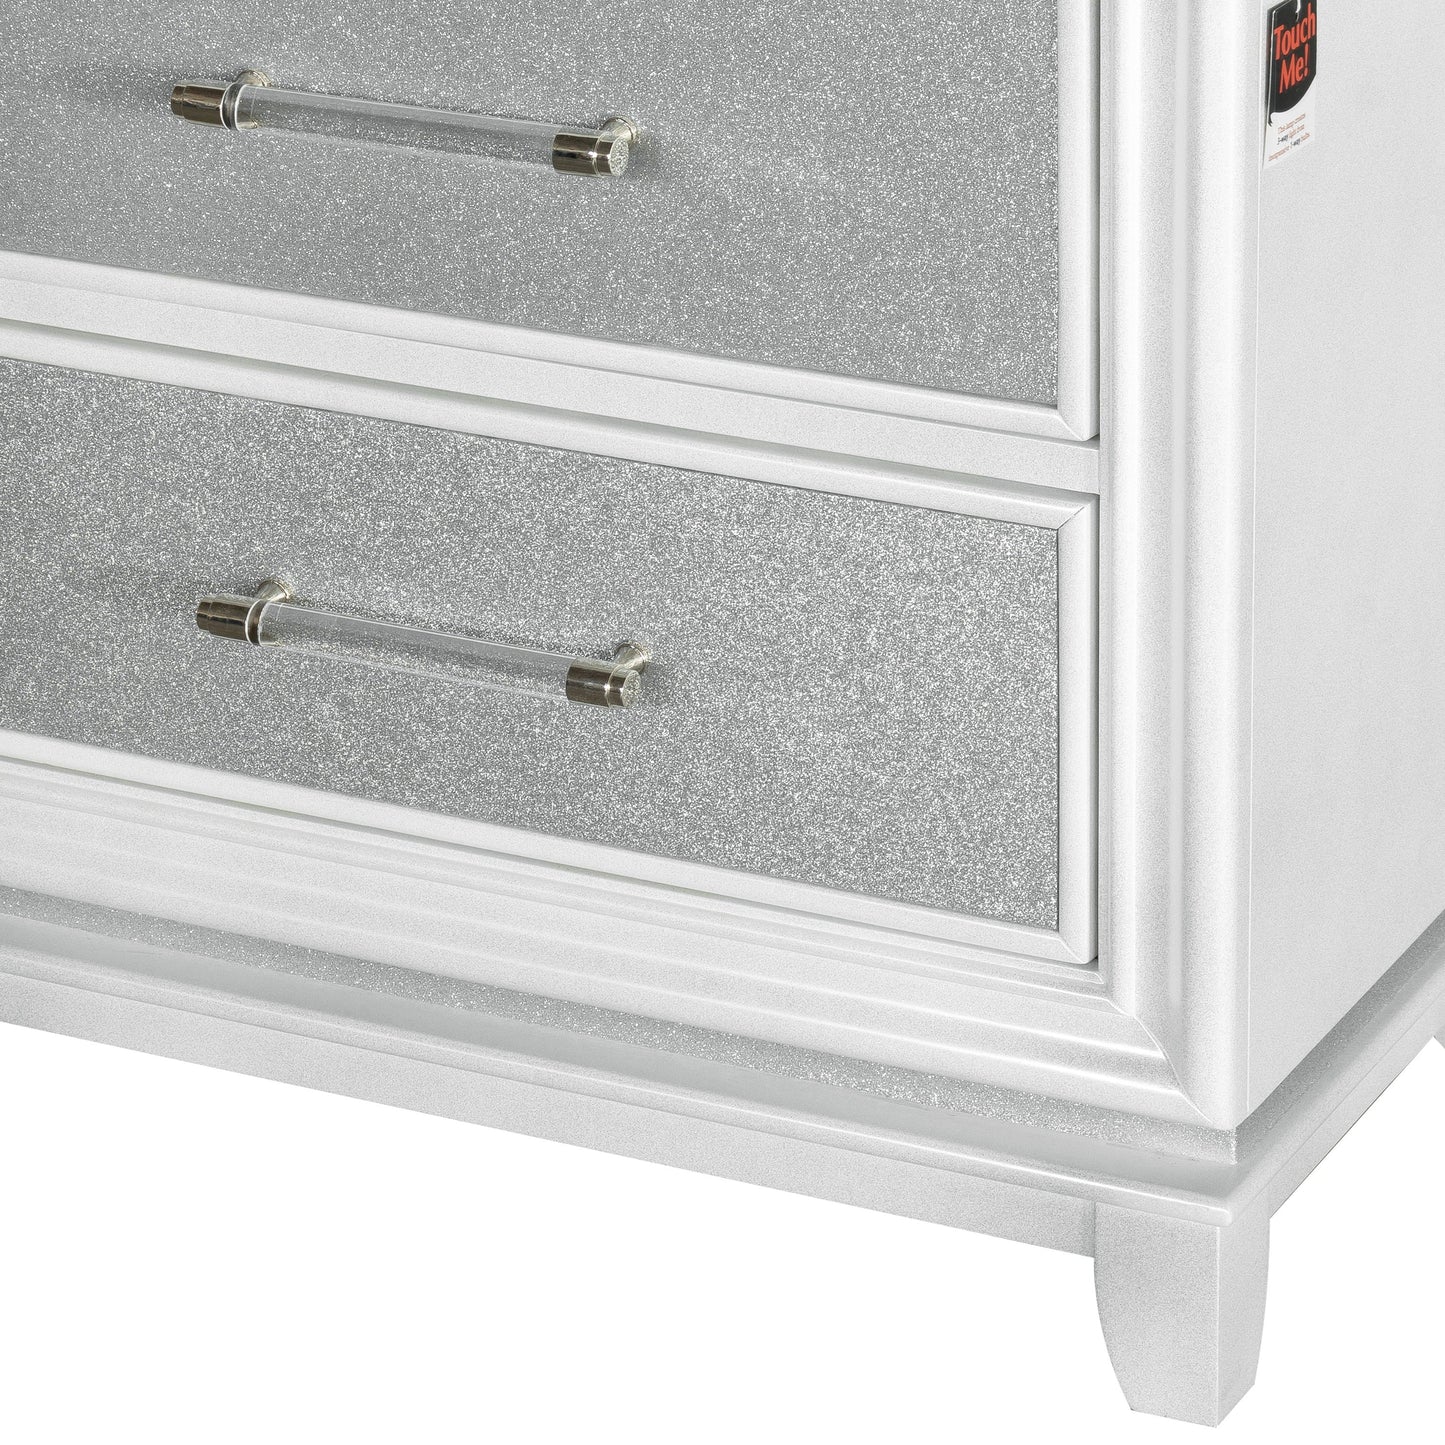 Galaxy 2-Drawer Bedroom Nightstand with LED Lights, Pearlized White